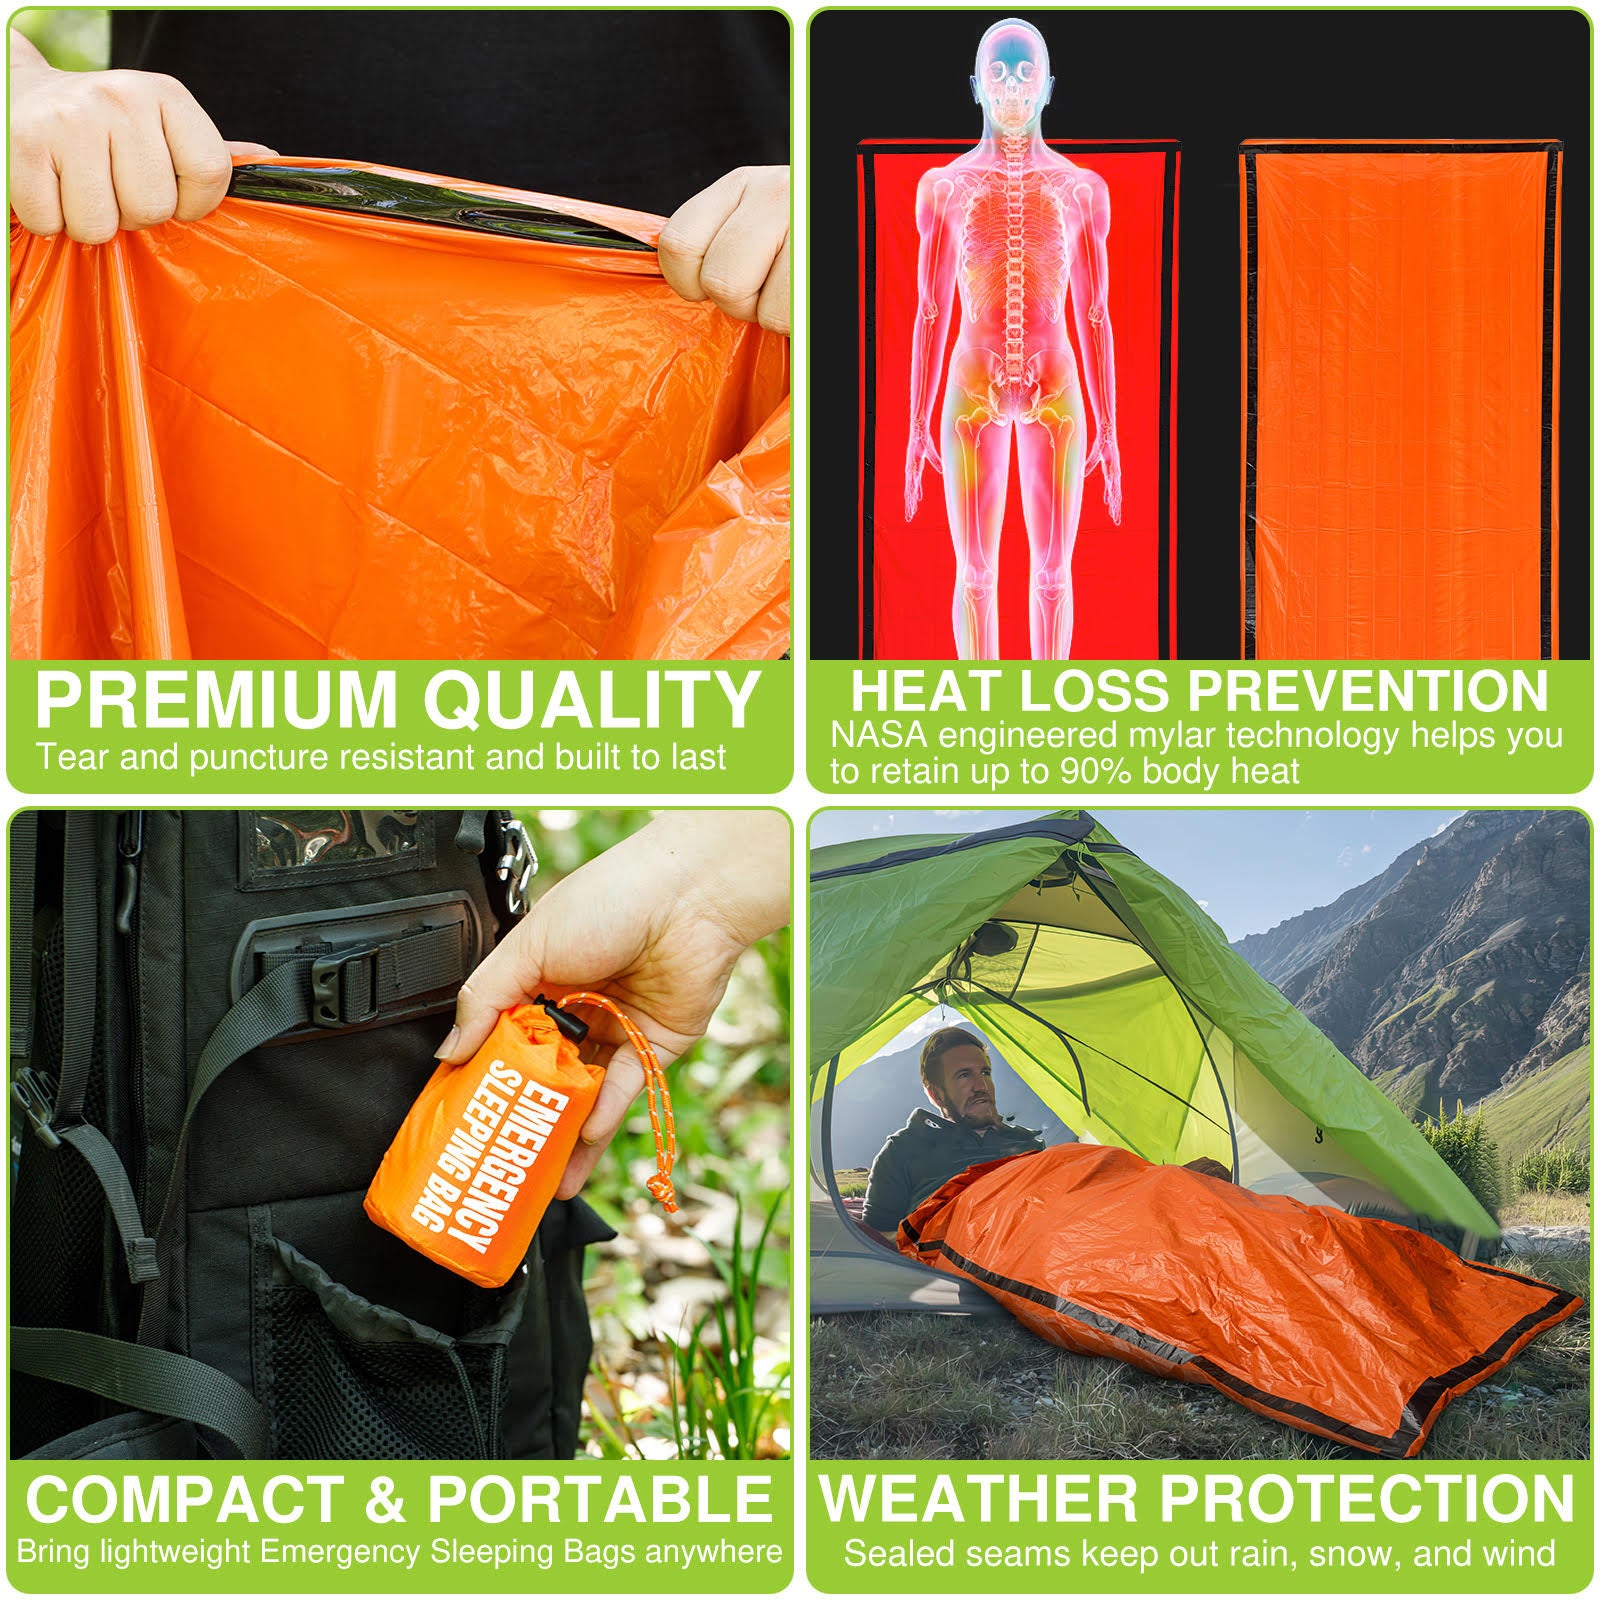 Mart Cobra Survival Set: 3-Pack Ultra-Light Emergency Sleeping Bags - 84" x 36" - Compact, Thermal Insulated